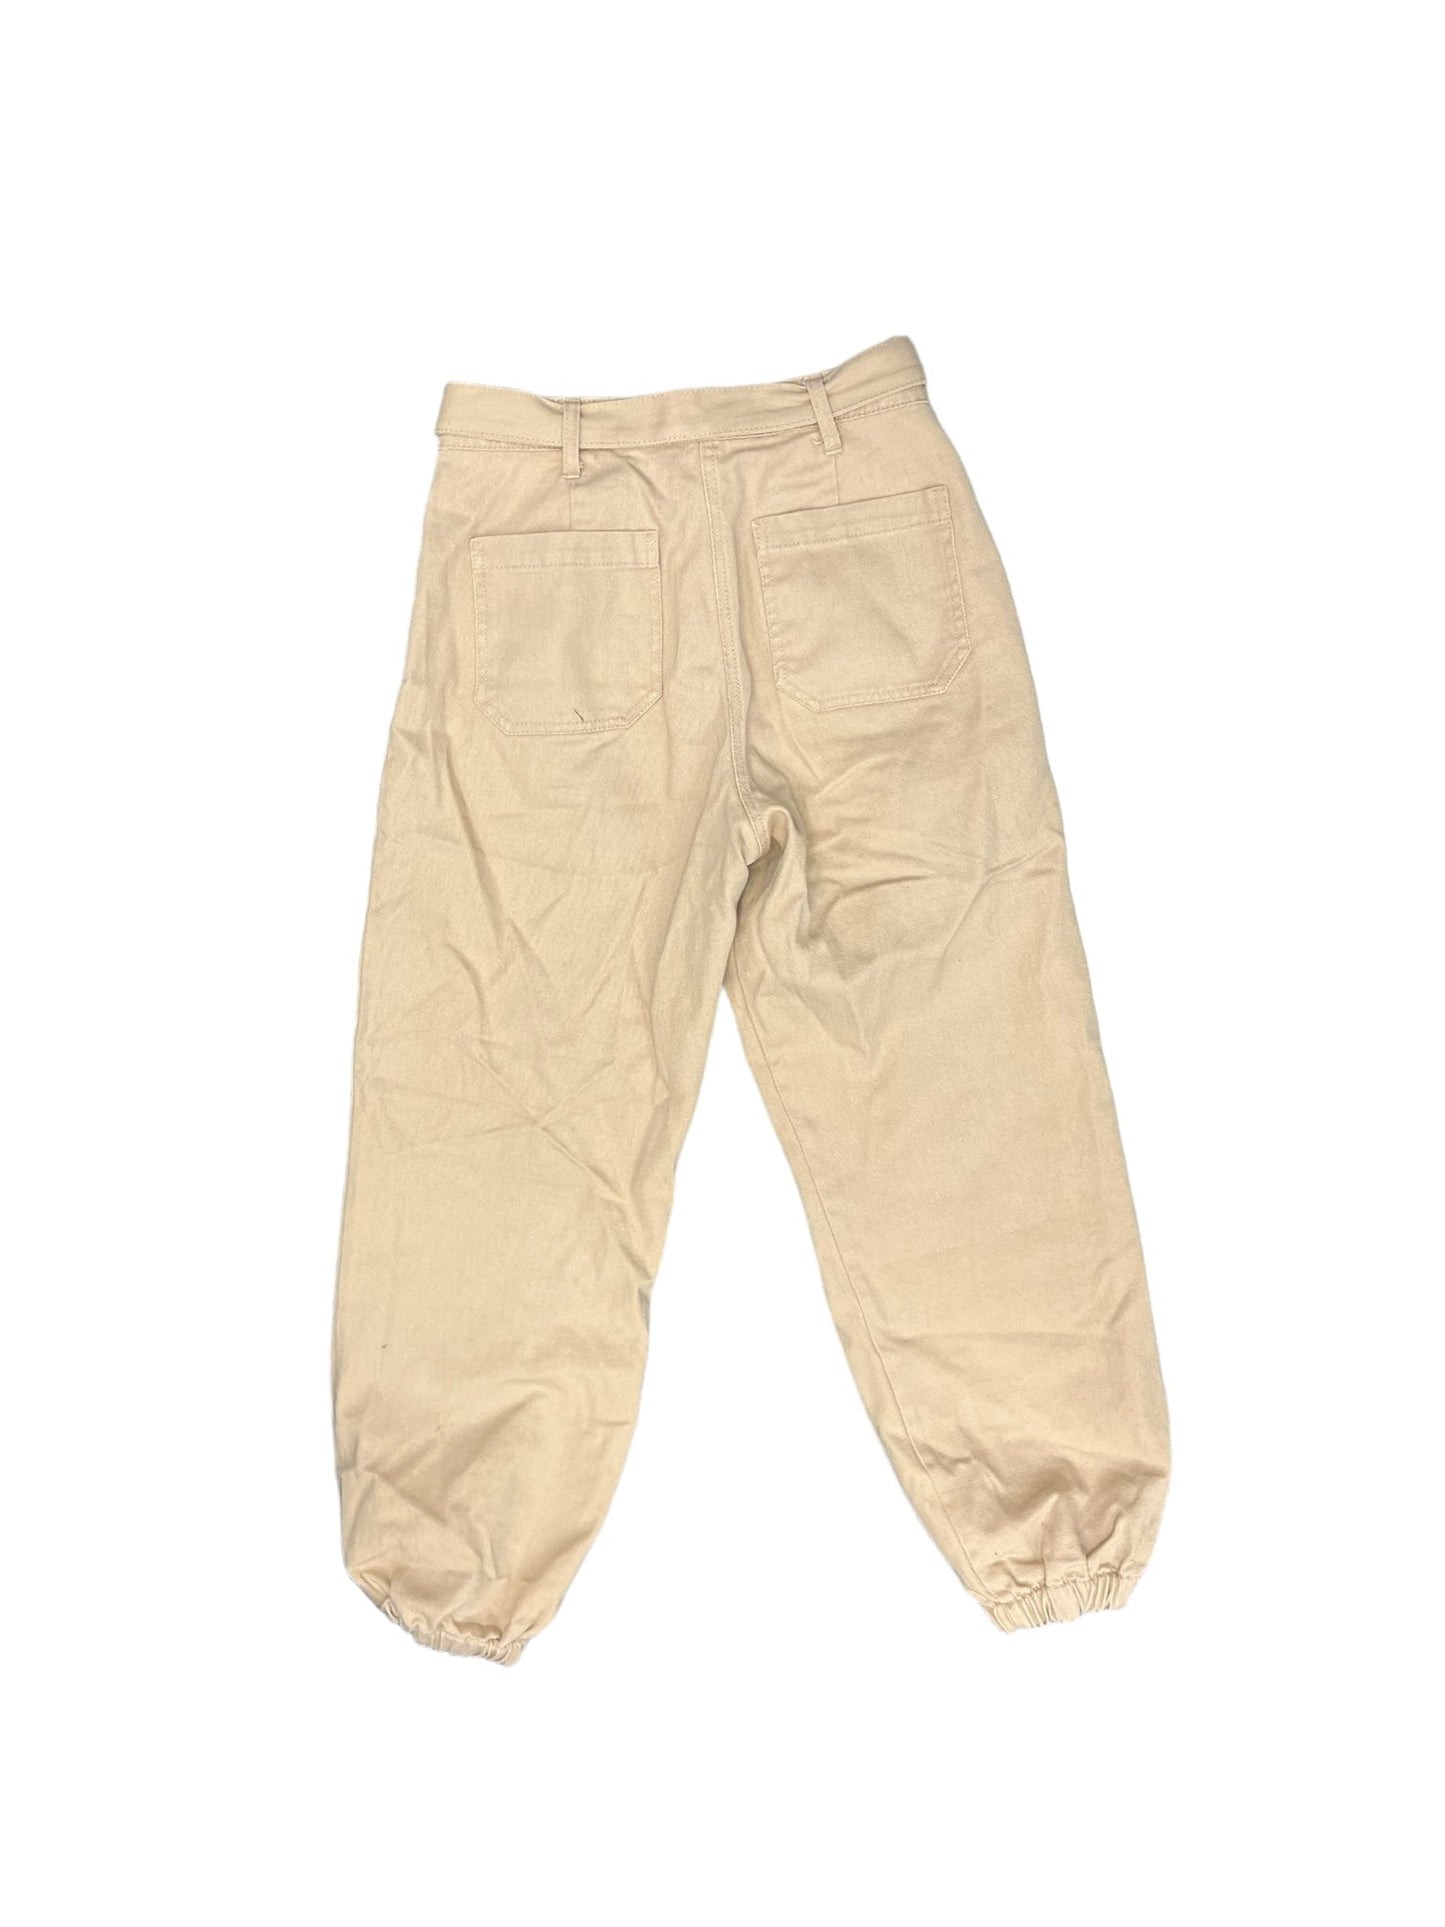 Pants Cargo & Utility By Forever 21  Size: 28